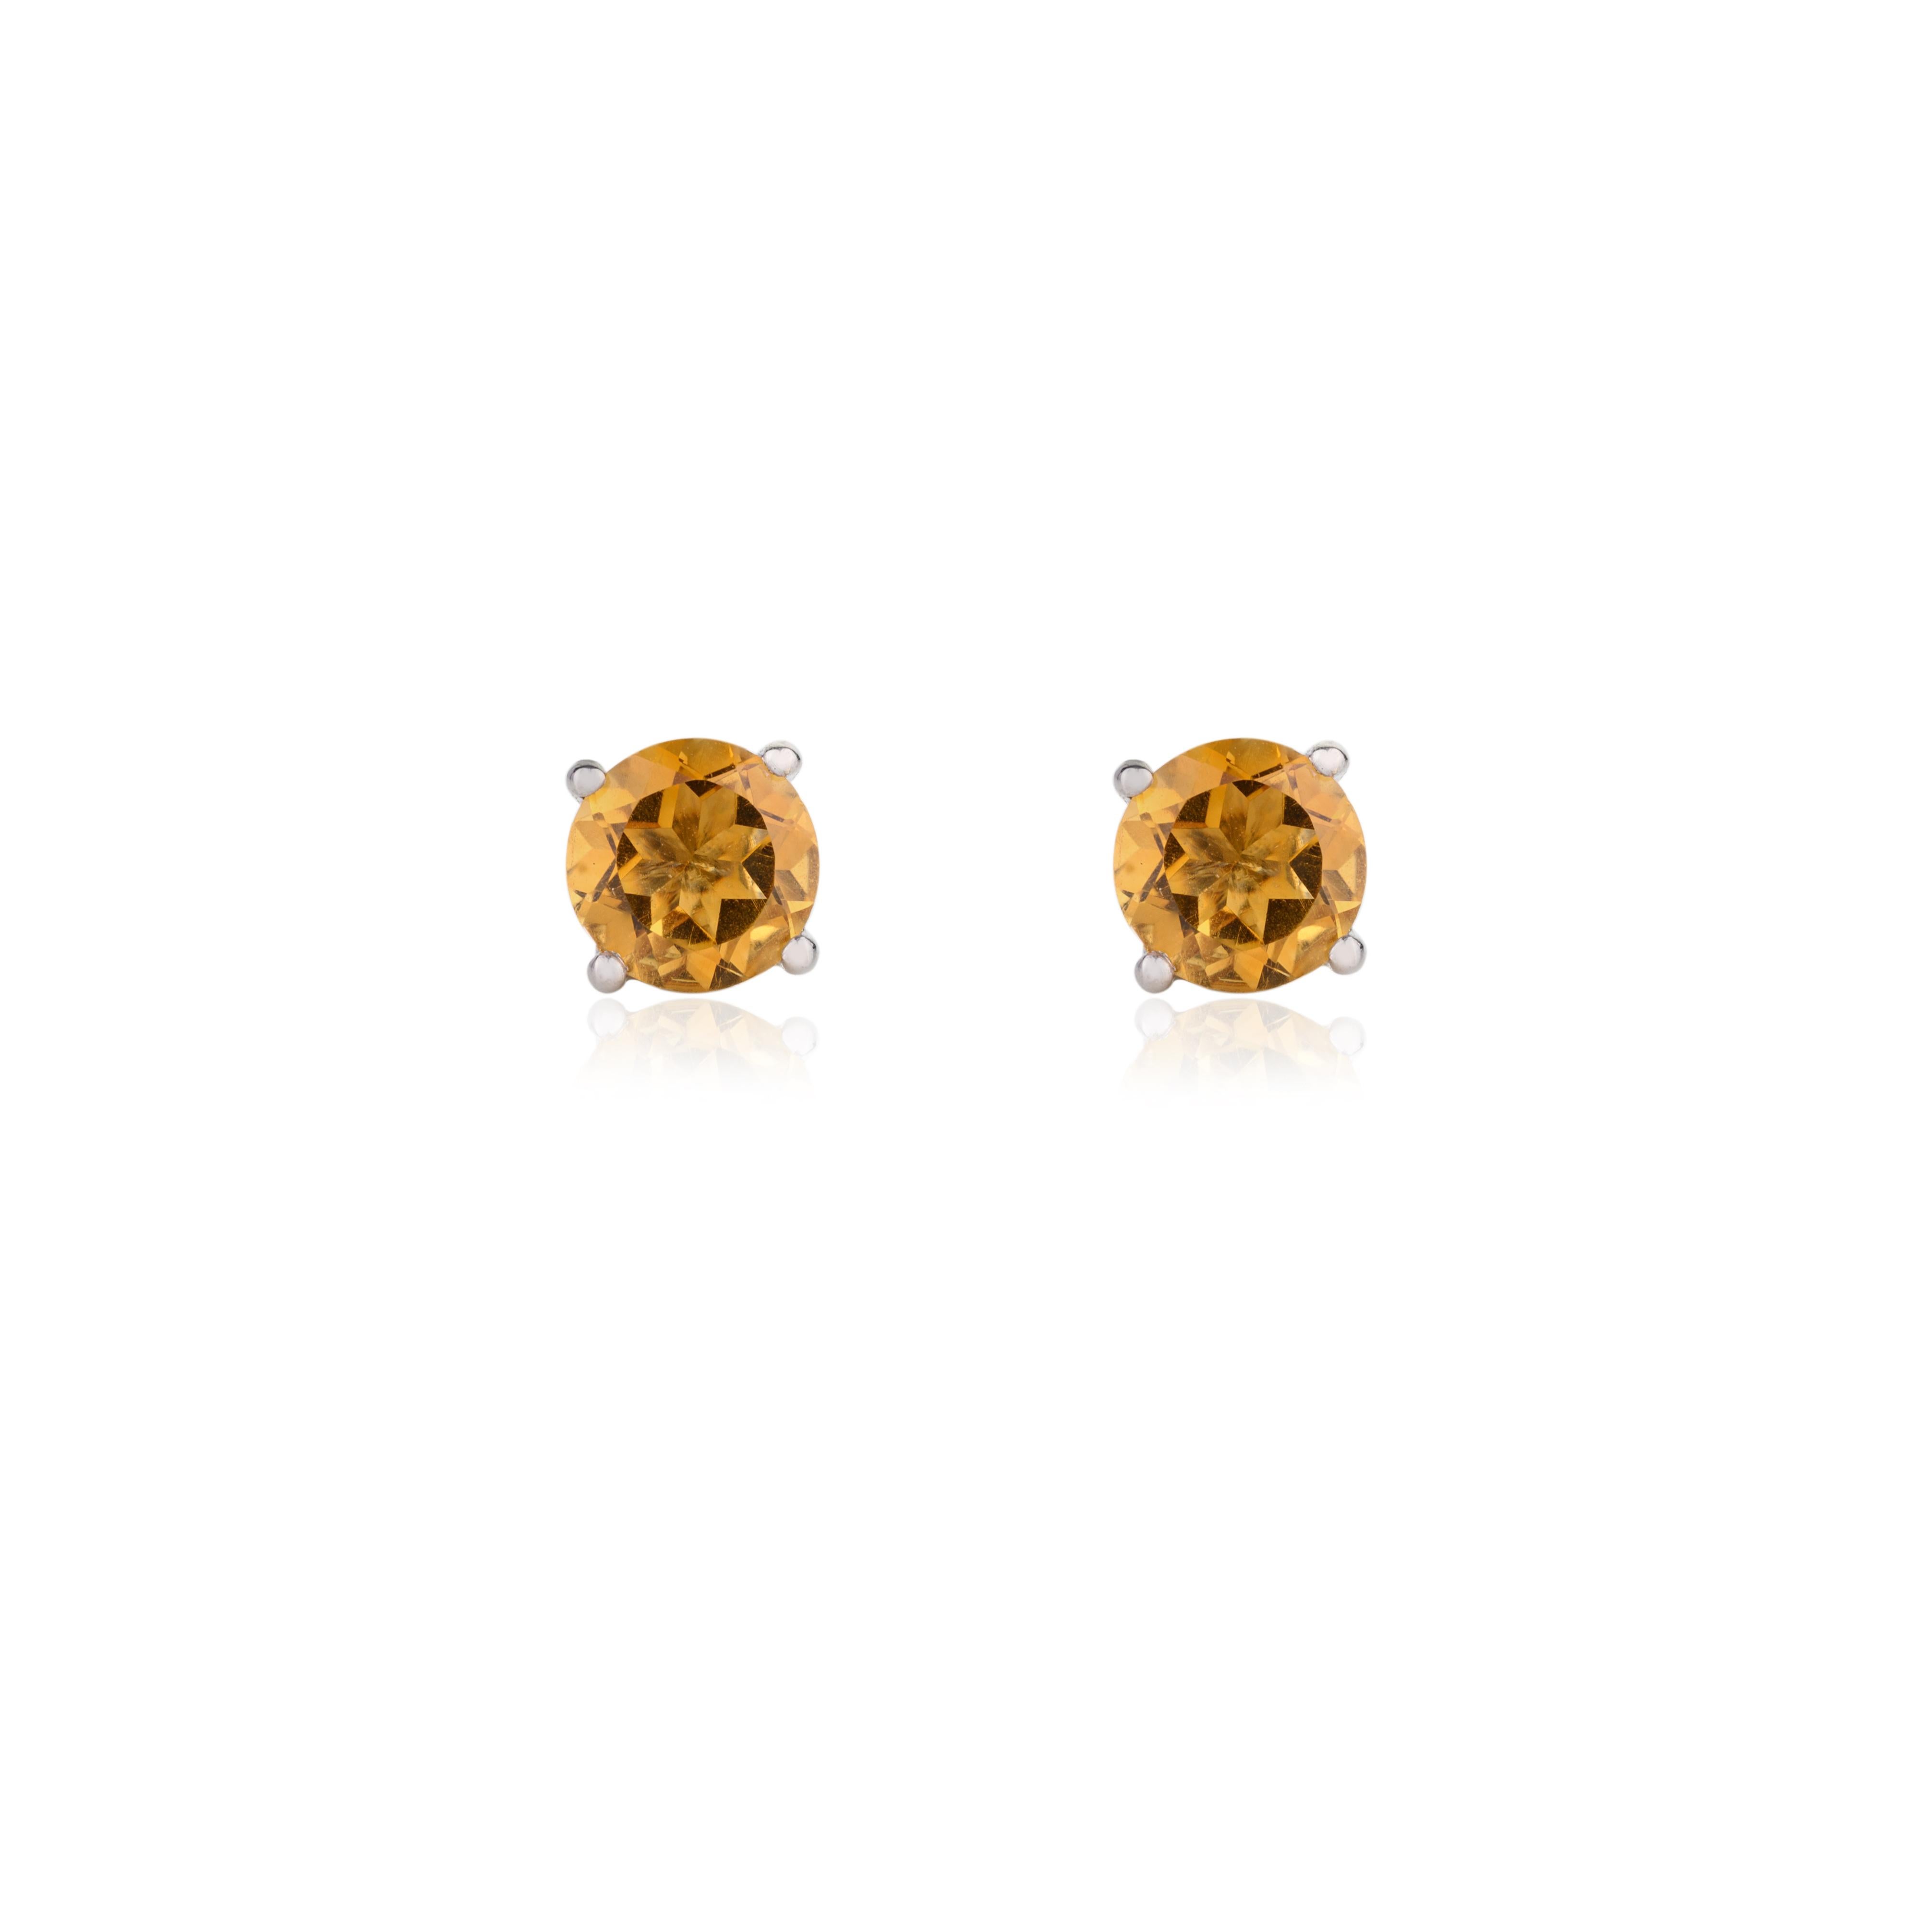 Faceted Citrine Solitaire Stud Earrings in 14k White Gold Gift for Her For Sale 2